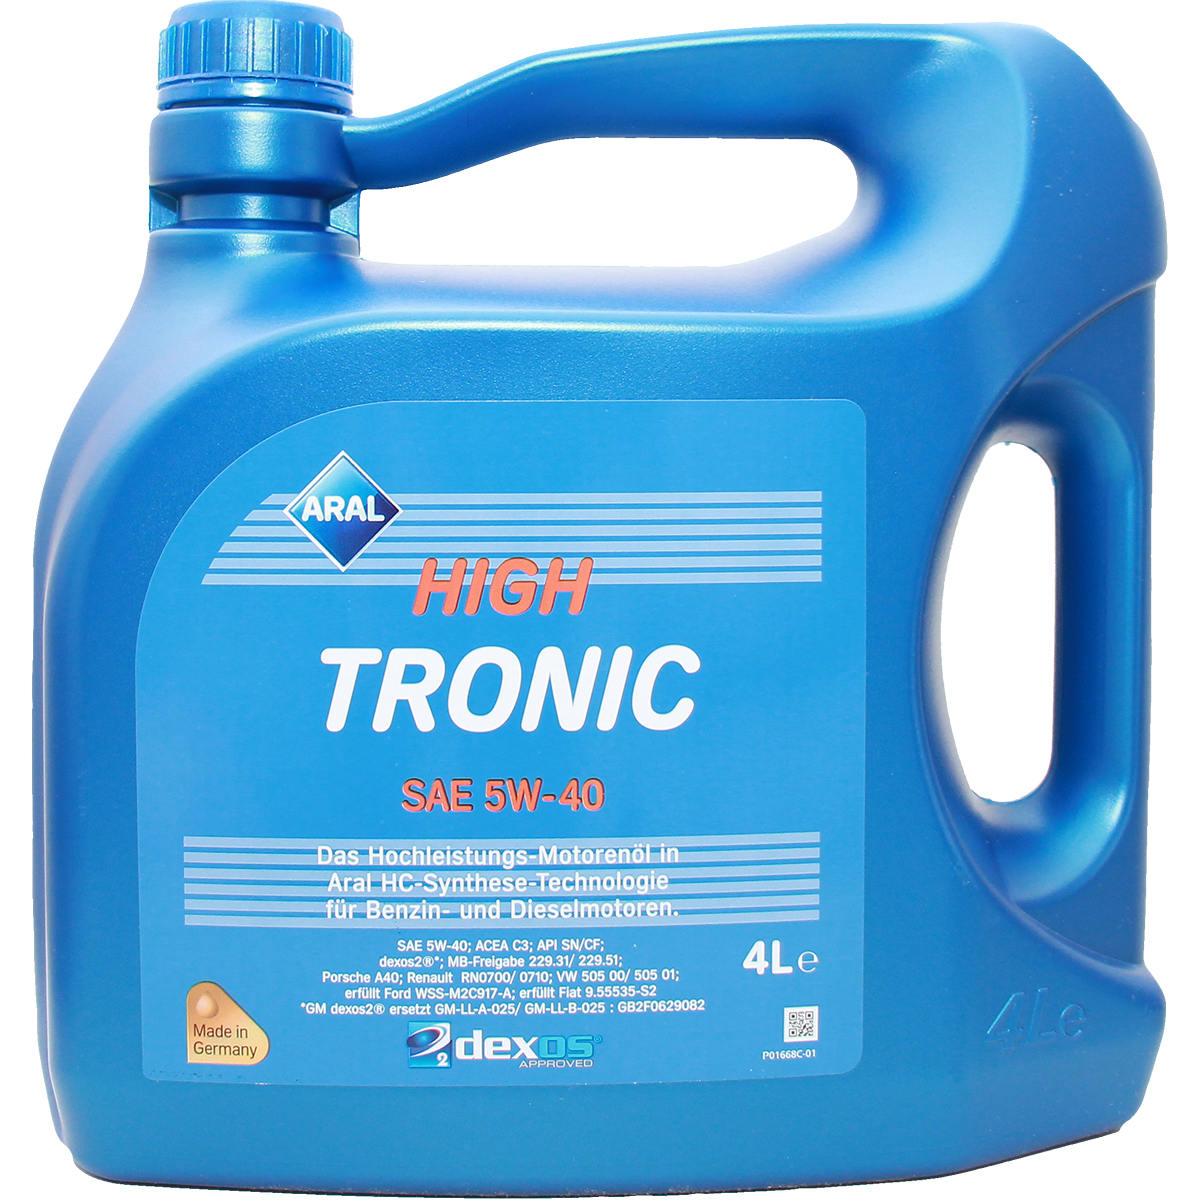 Aral HighTronic 5W-40 4+3 Liter